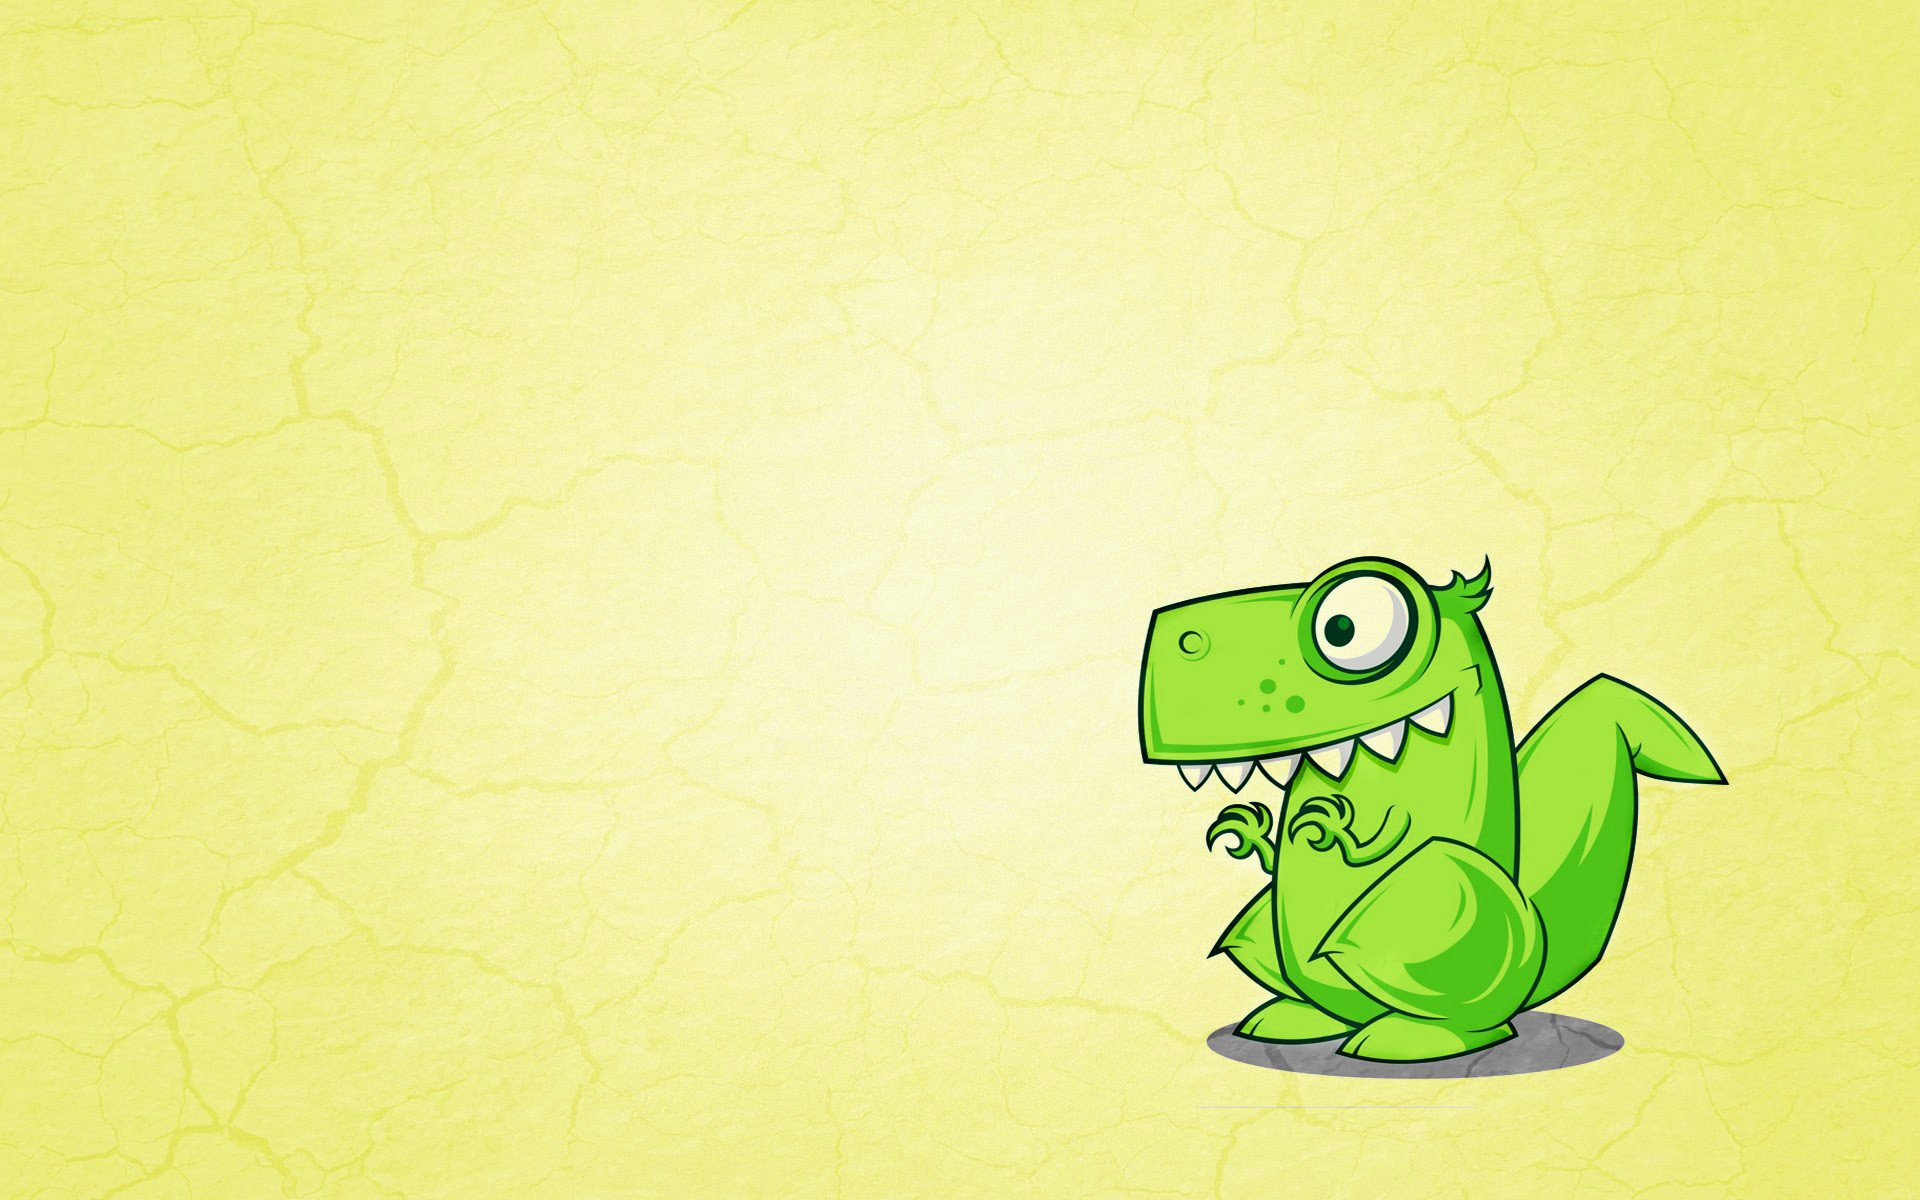 Cute Dino Wallpaper by GraphicStore on Dribbble